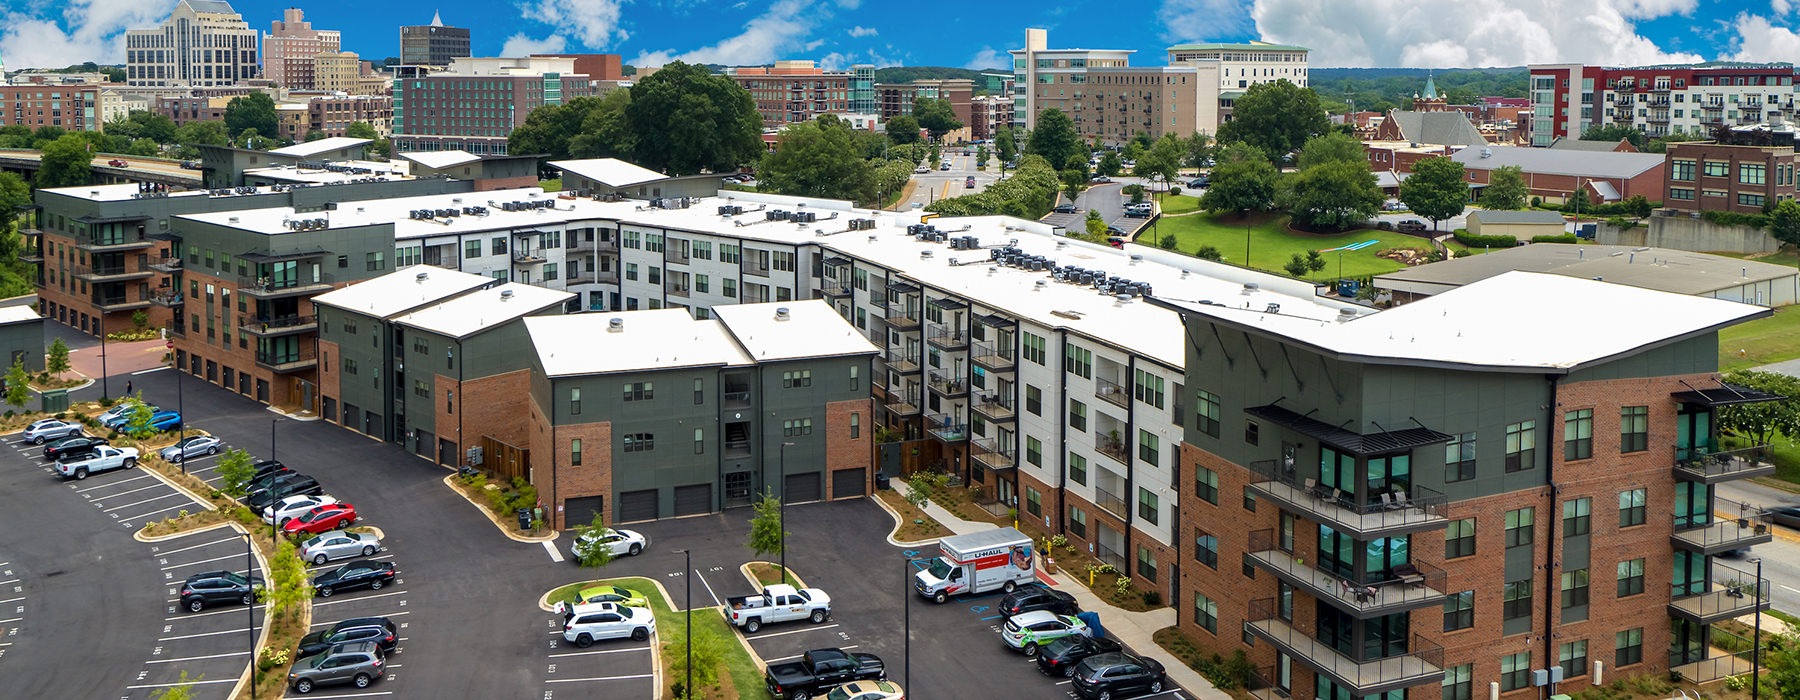 Aerial view of Trailside at Reedy Point Apartments in Greenville, SC